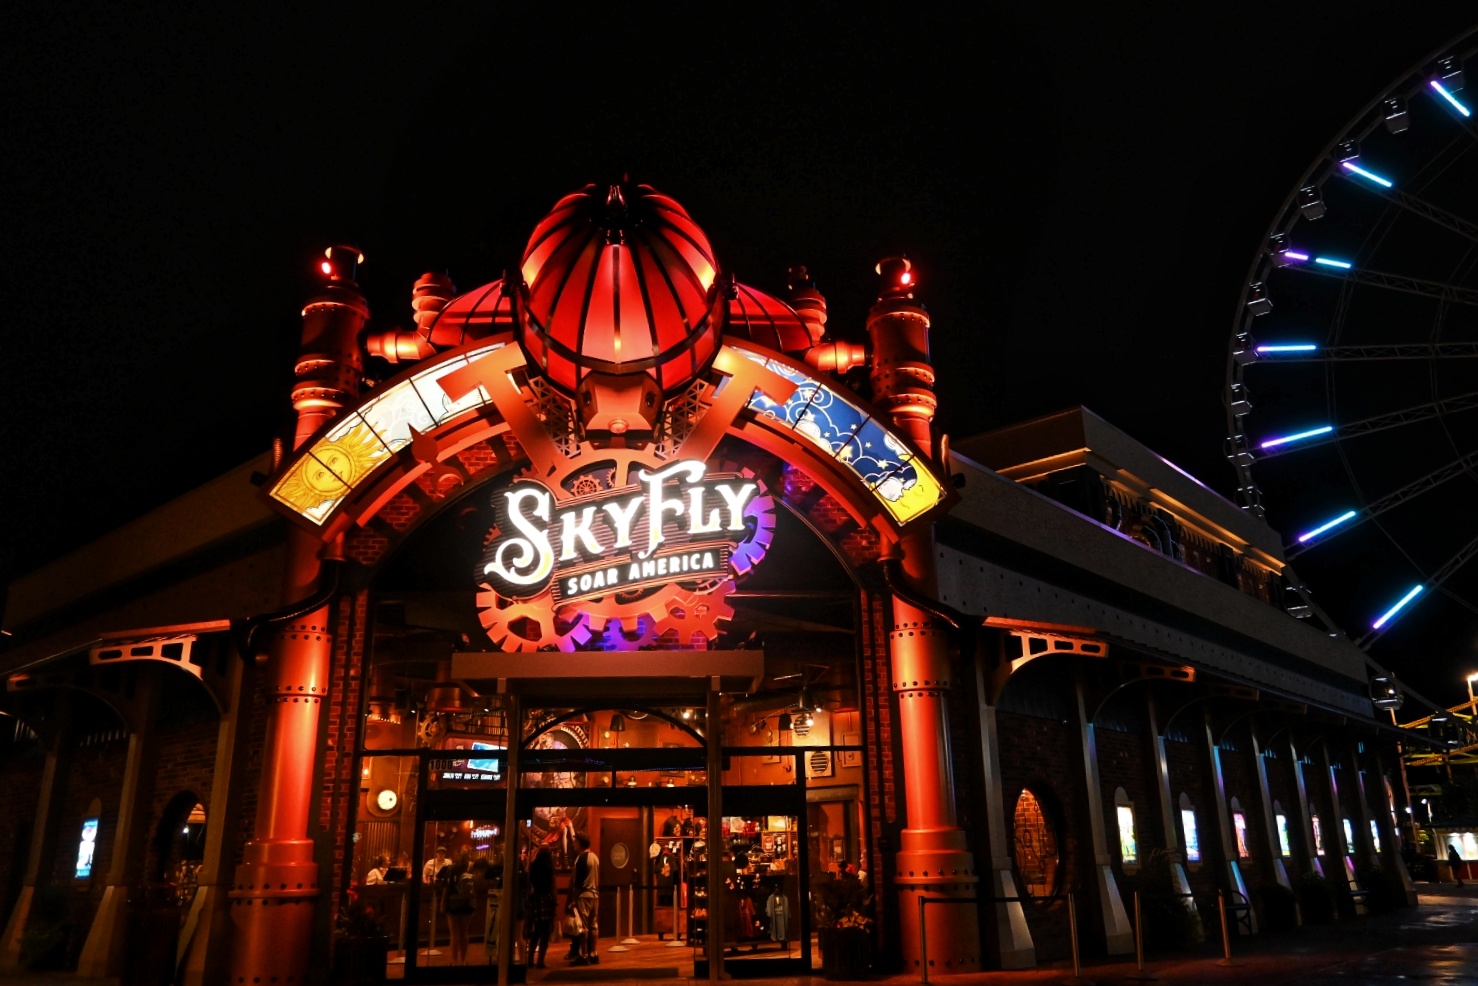 SkyFly: Soar America at The Island in Pigeon Forge, TN